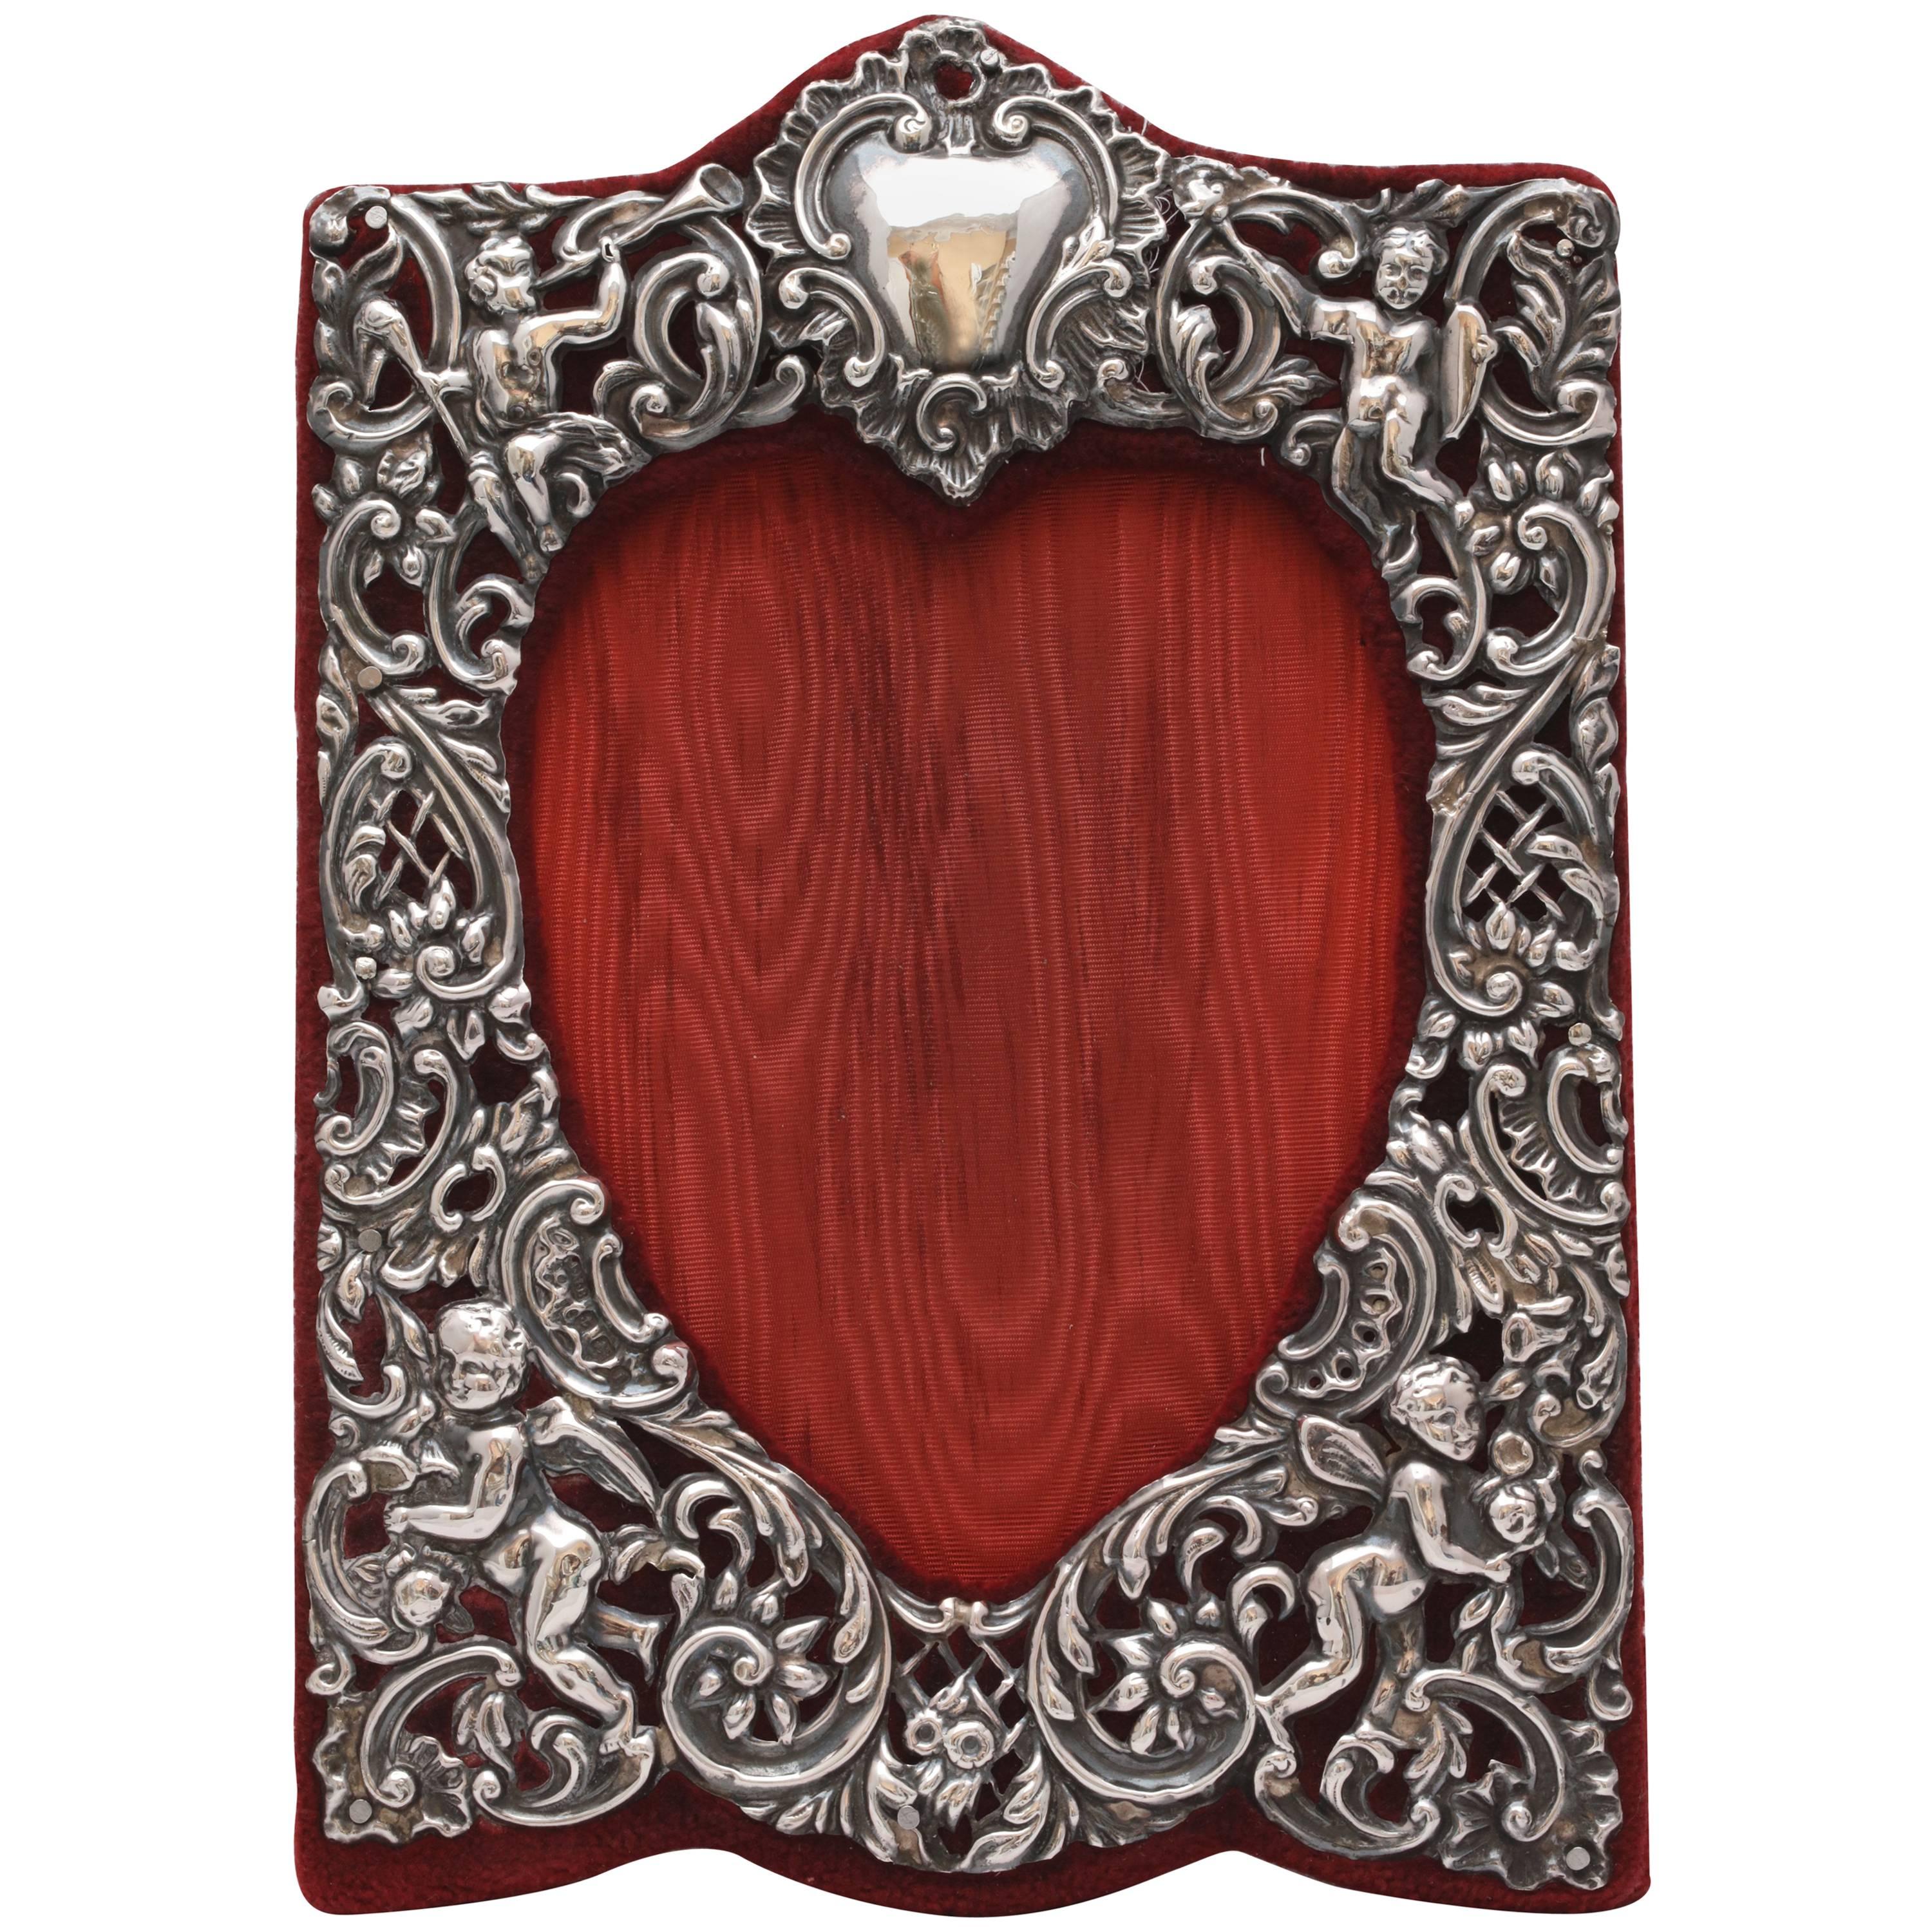 Edwardian Sterling Silver Heart-Form Picture Frame in the Victorian Style